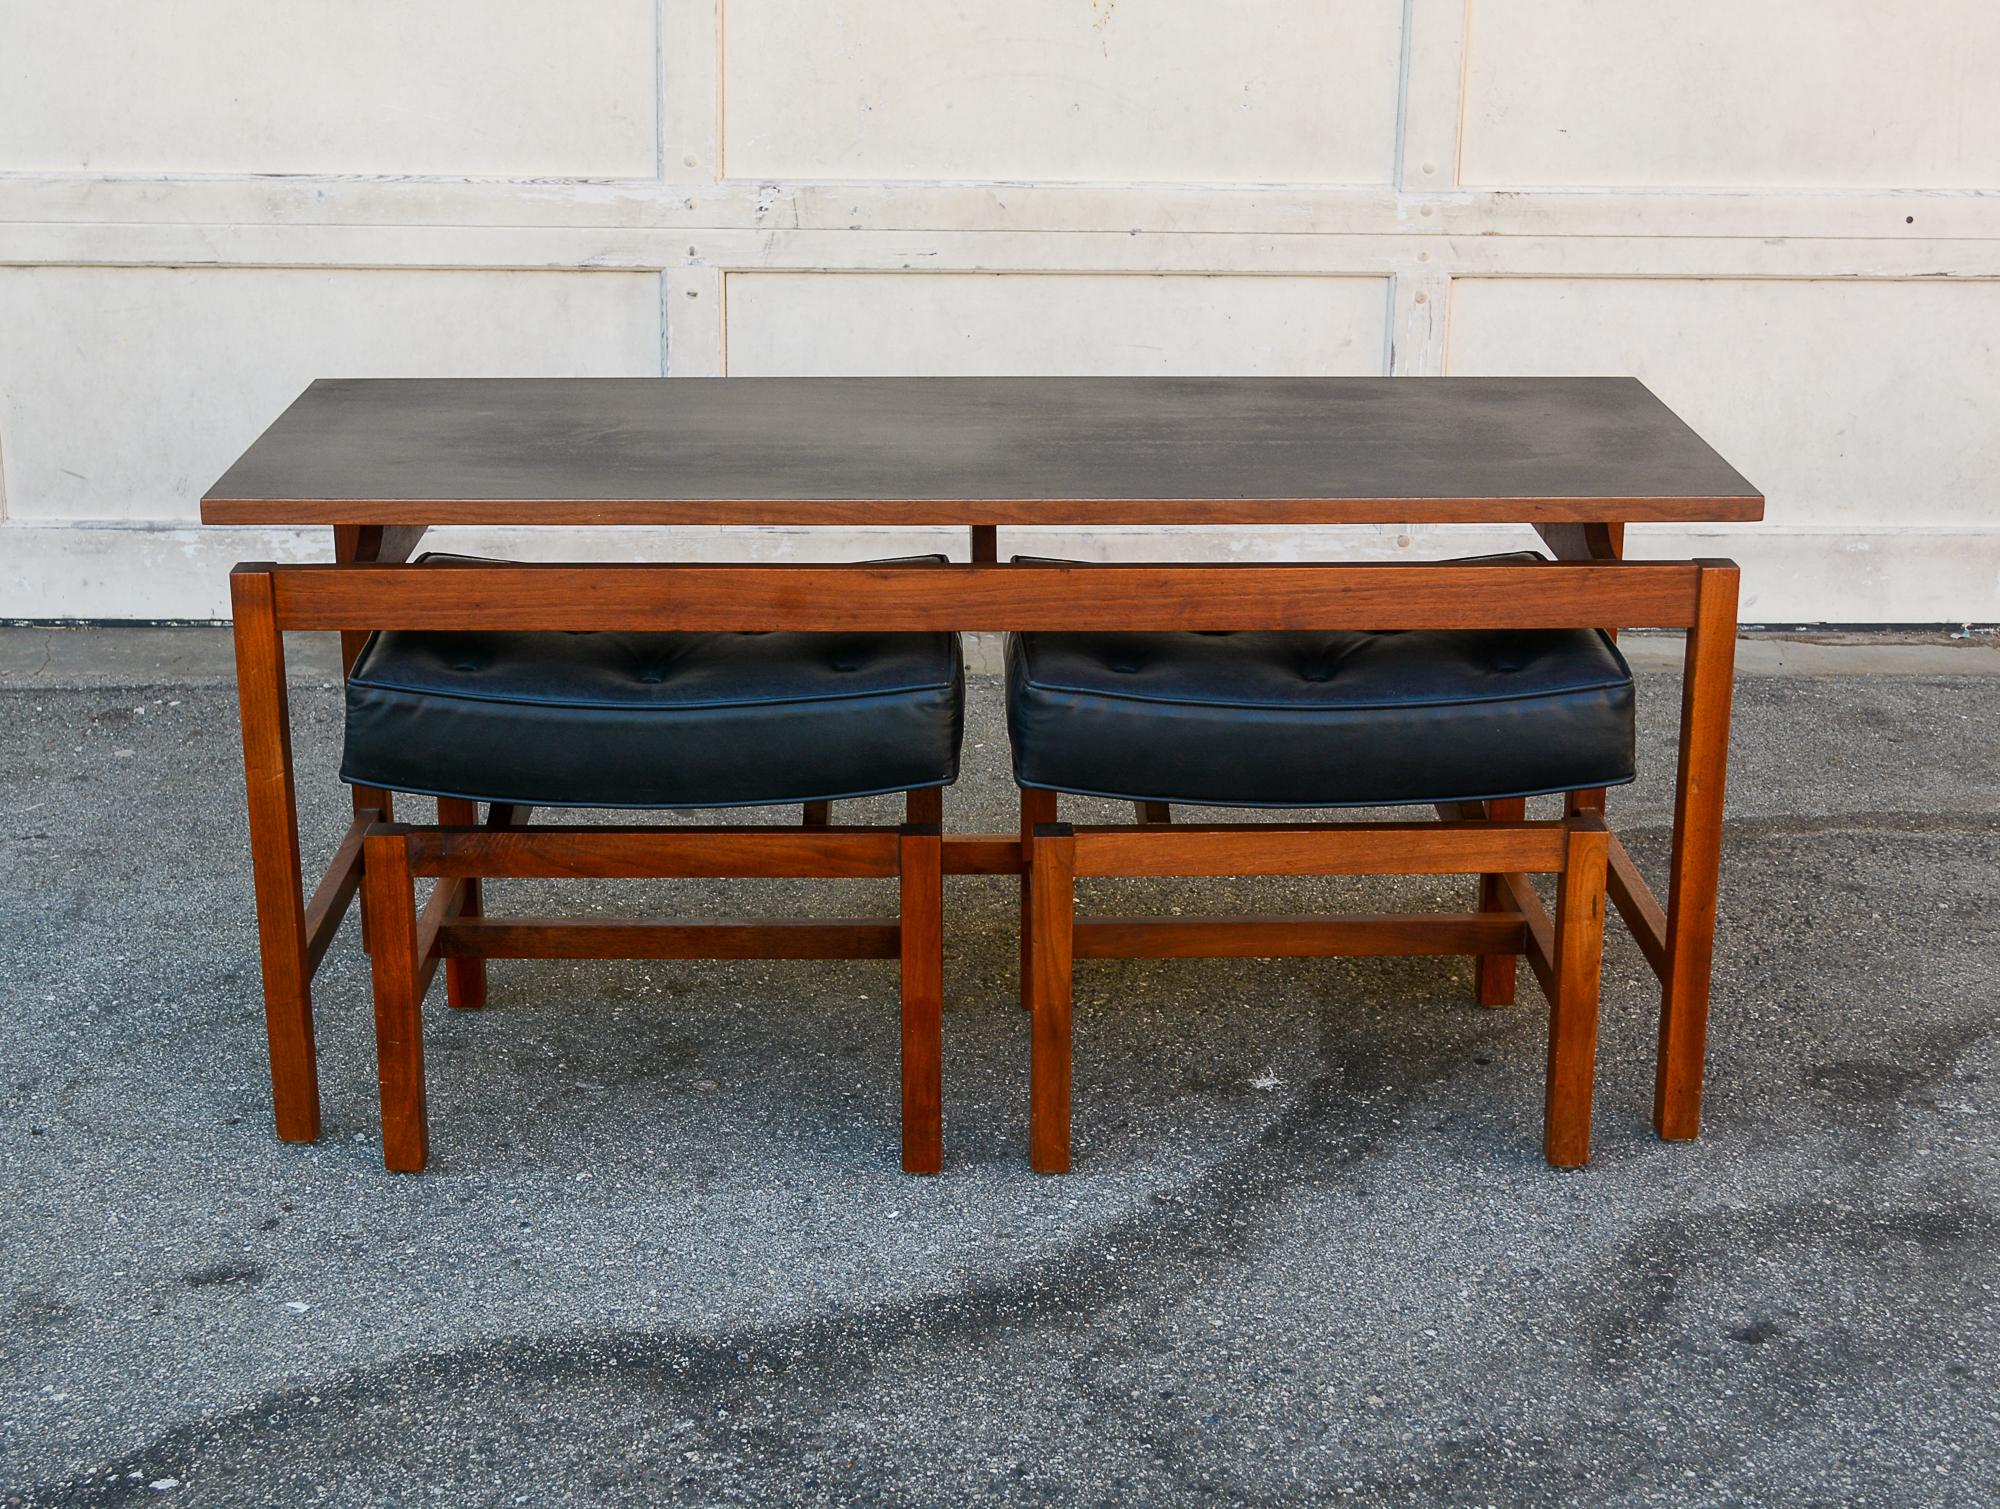 Low table with two stools made by Richbilt Manufacturing. The table and stools are walnut. The table has an inset black laminate top. This set is sometimes attributed to Jens Risom, but he did not design anything for Richbilt. Dimensions listed are